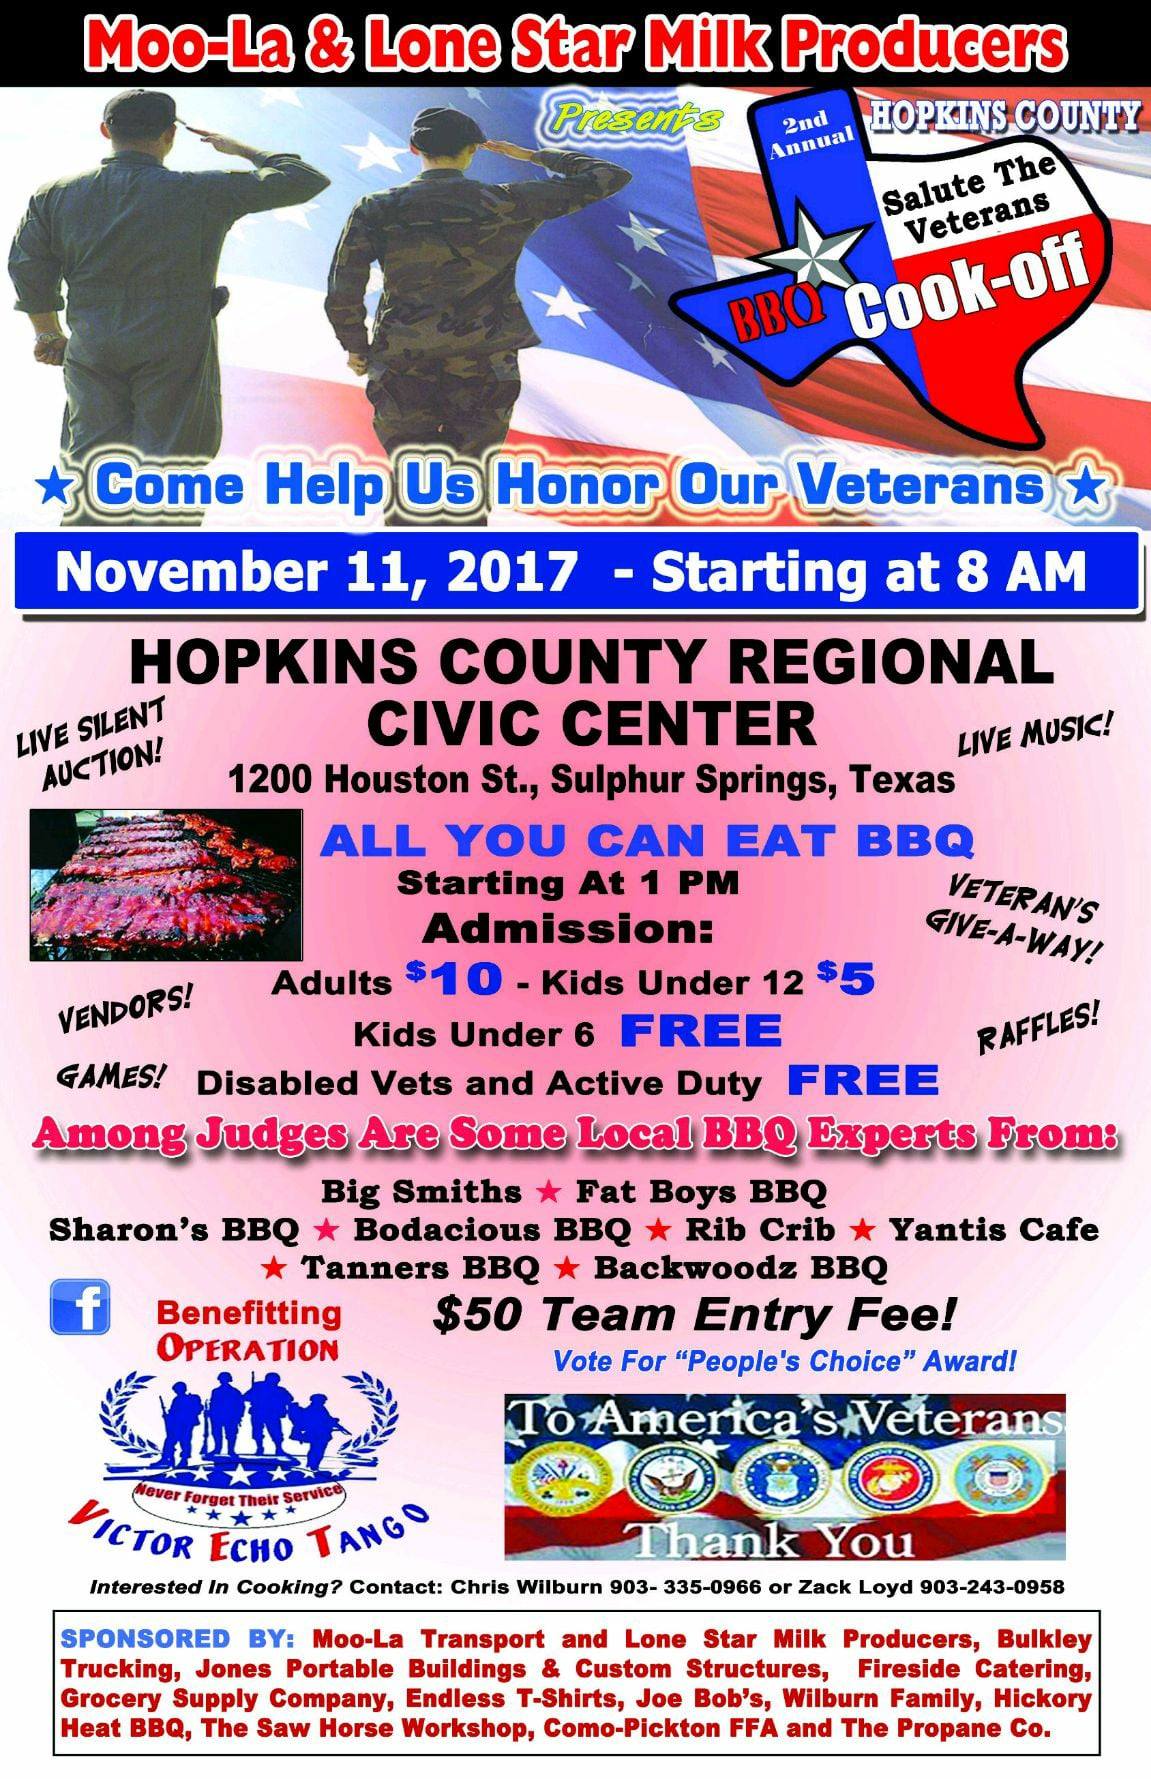 All-You-Can-Eat Salute the Veterans BBQ Cook-Off on Saturday at Civic Center